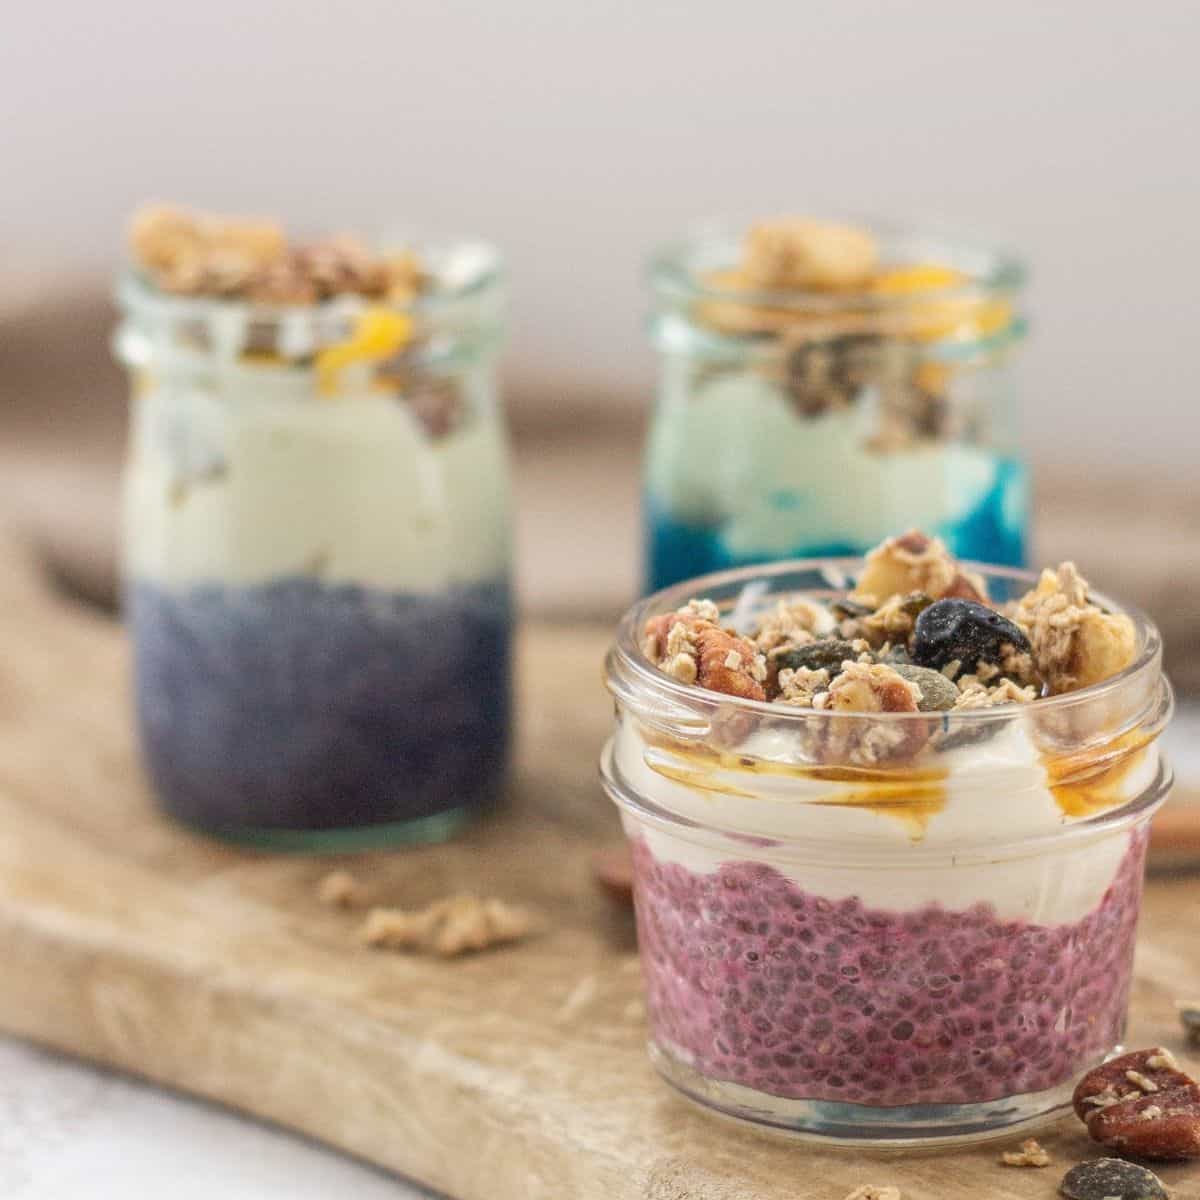 How to Make Easy Vegan Chia Pudding – a quick, simple and easy breakfast or pudding!